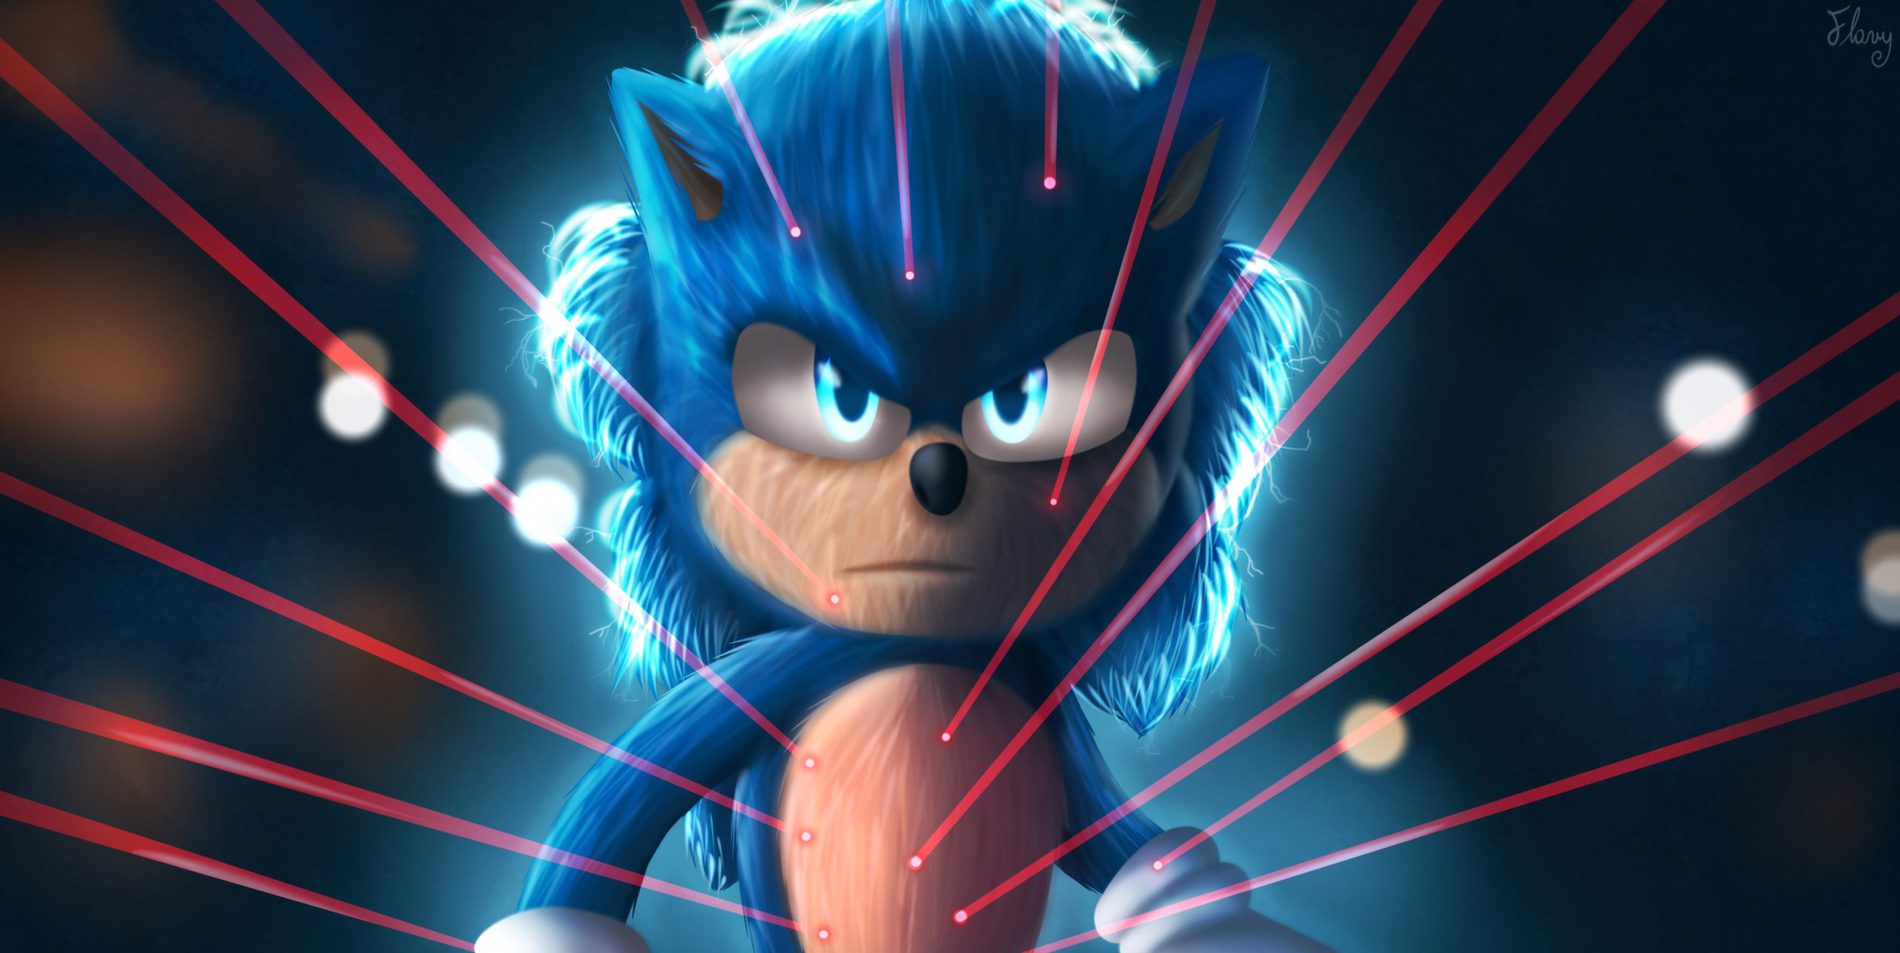 "Sonic The Hedgehog" will be released in February